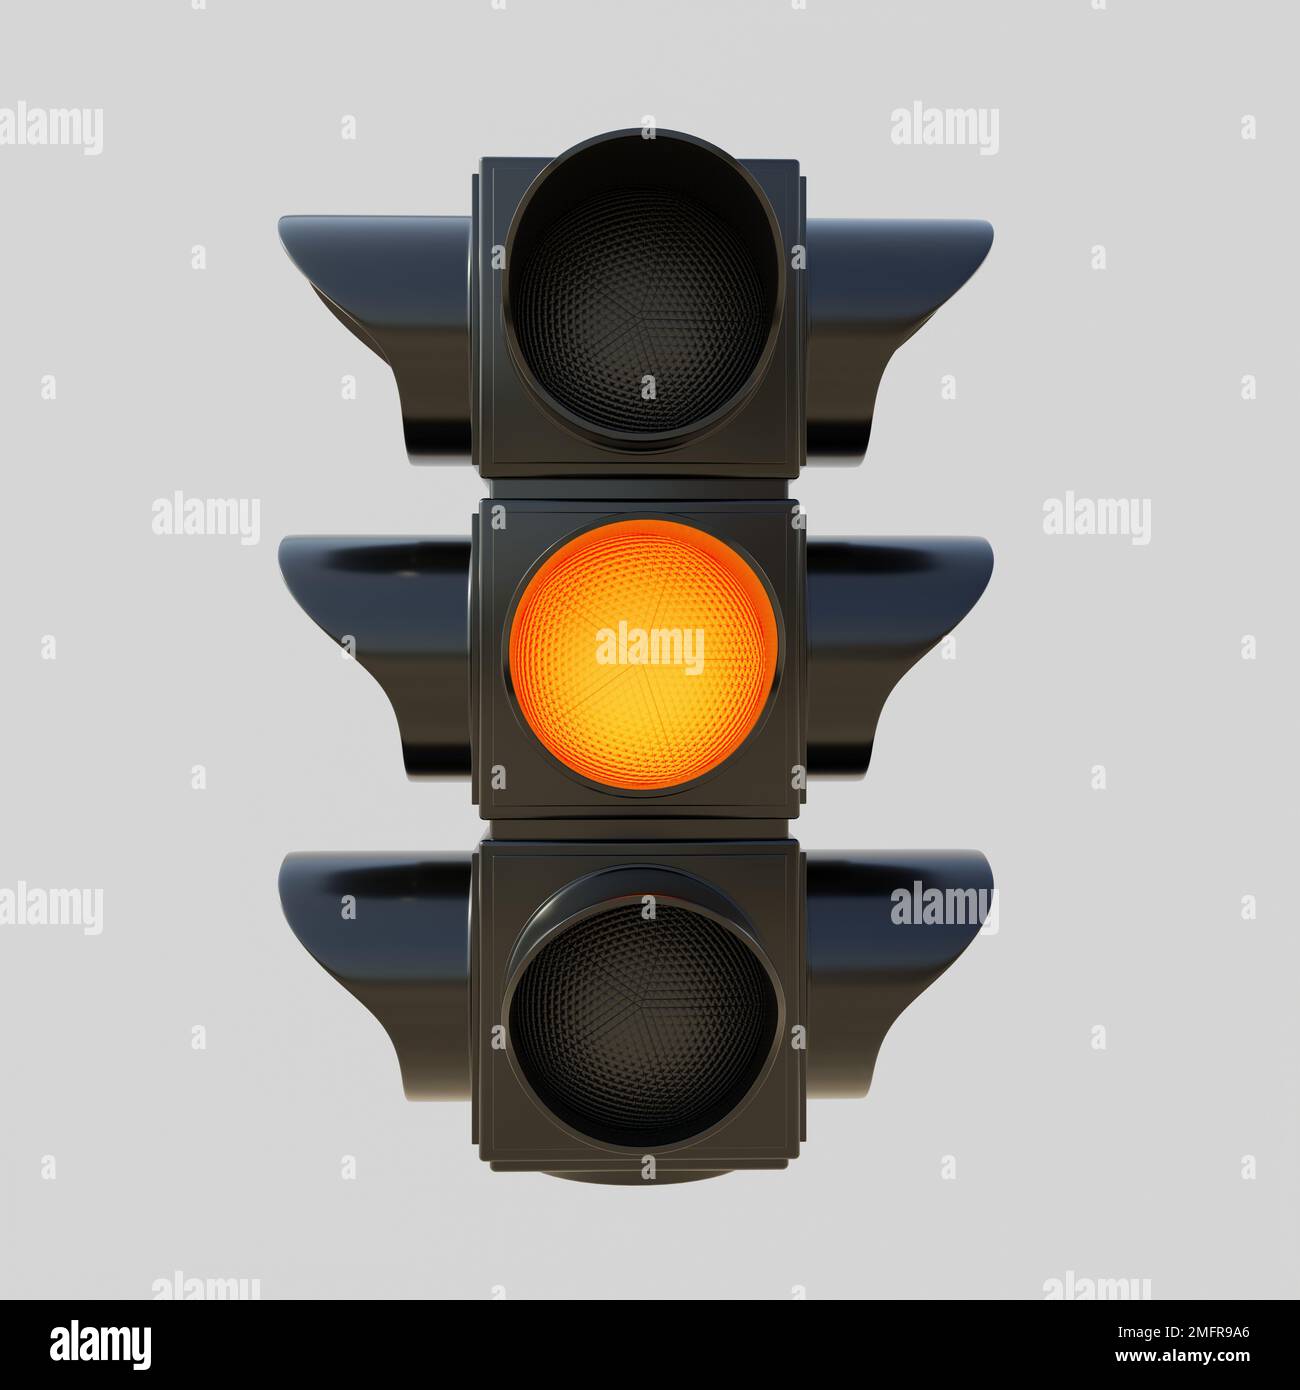 Amber, Yellow Orange Traffic Light isolated cutout on grey background. Semaphore traffic warning attention signal. Street caution concept. 3d render Stock Photo